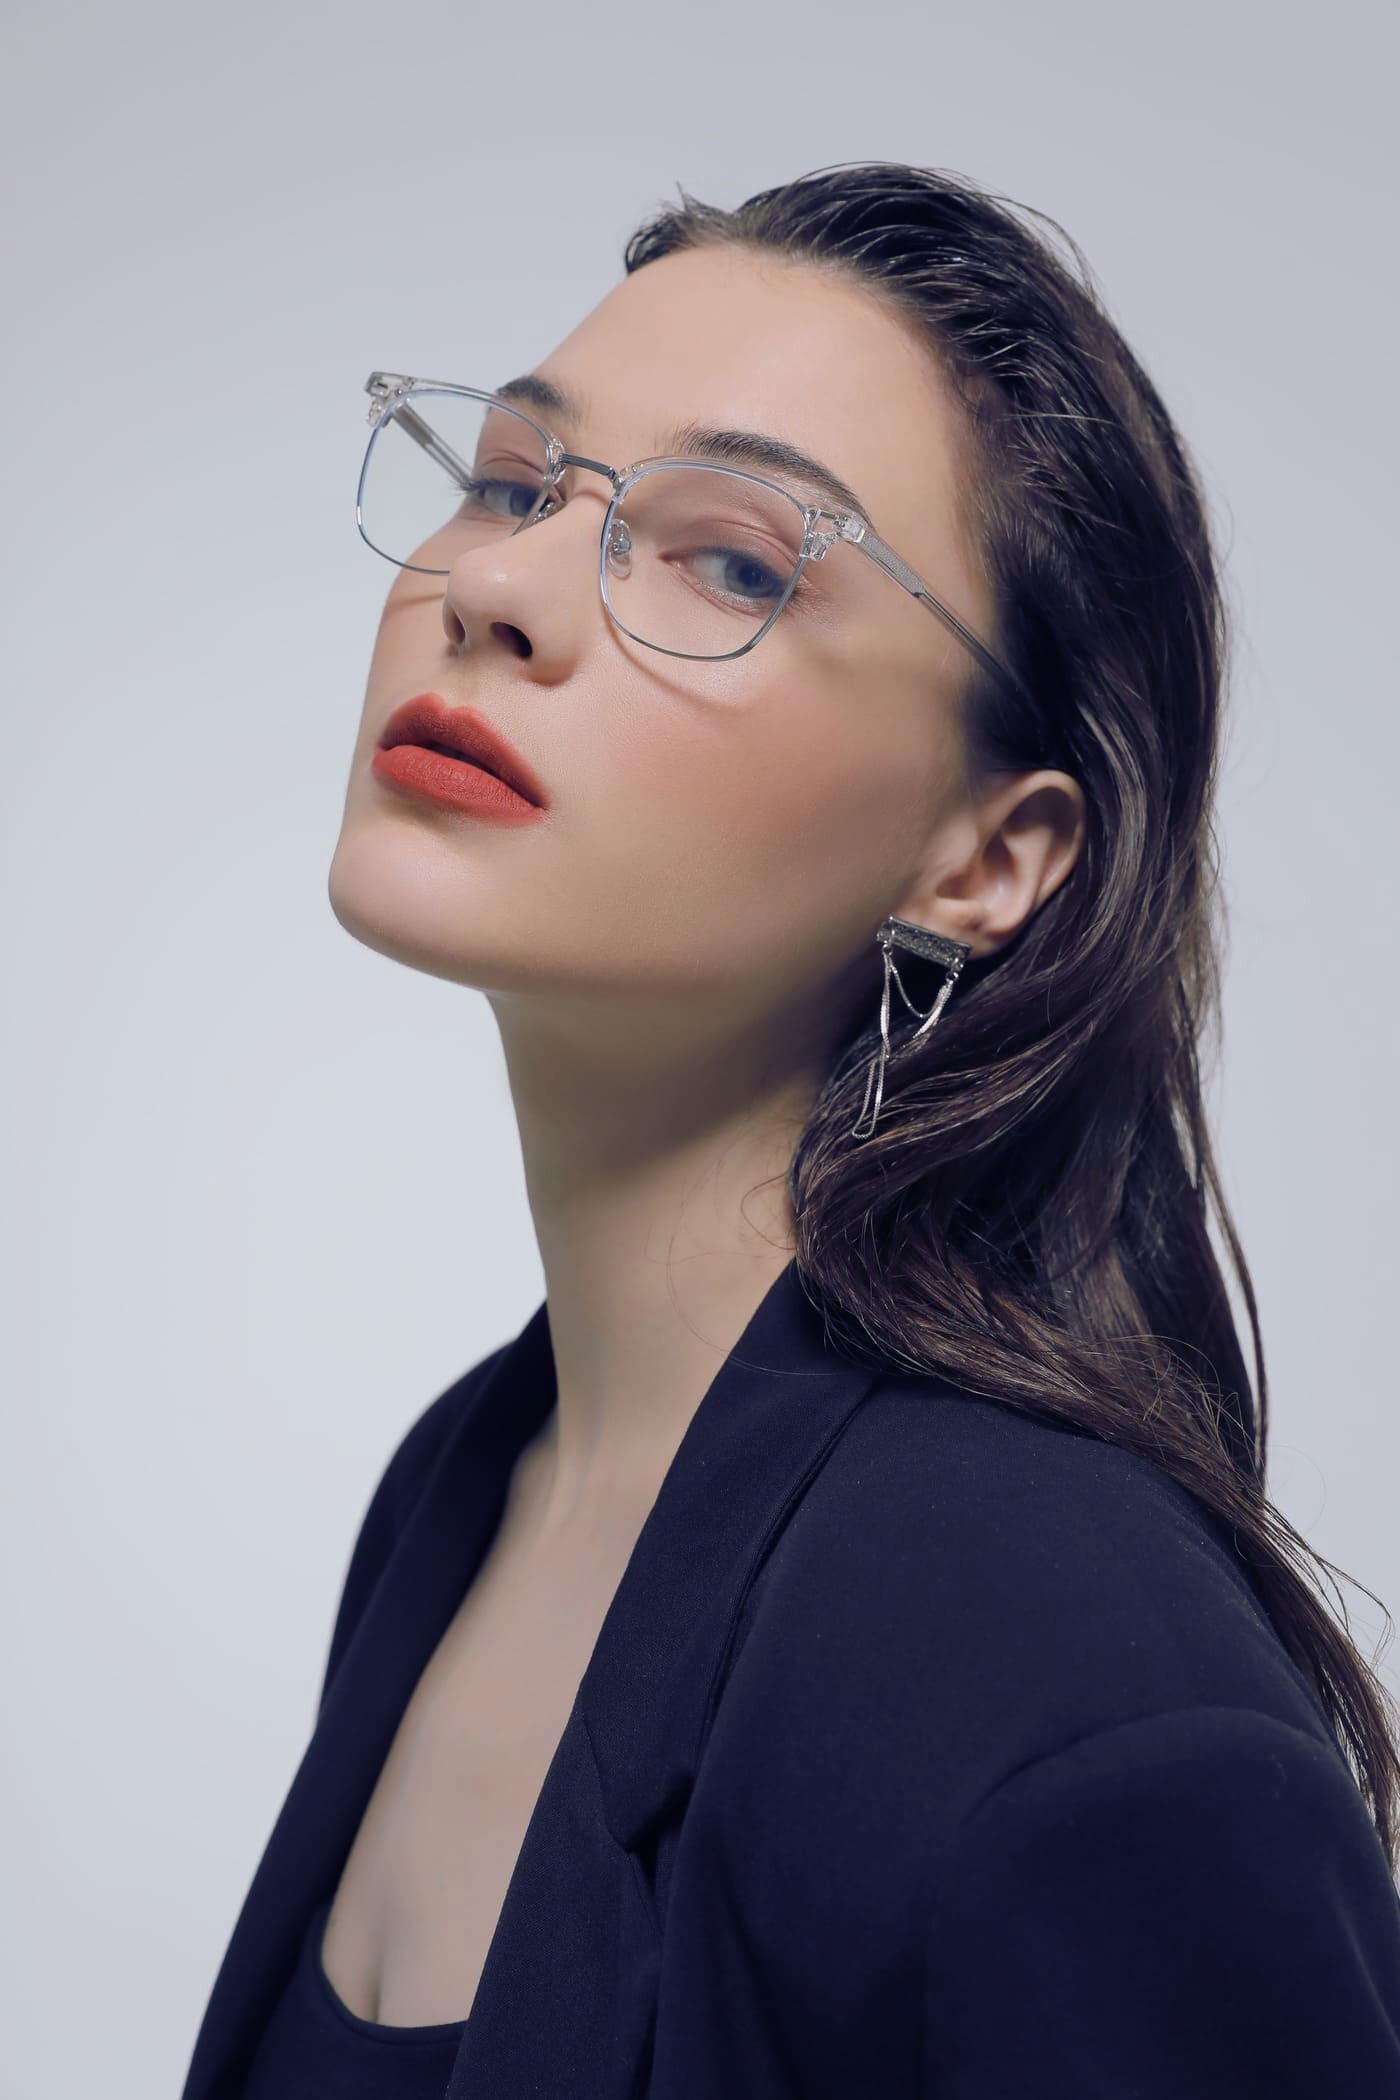 Combine Style with Eye Protection with Giustizieri Vecchi's Fashion-Forward Computer Glasses Designs